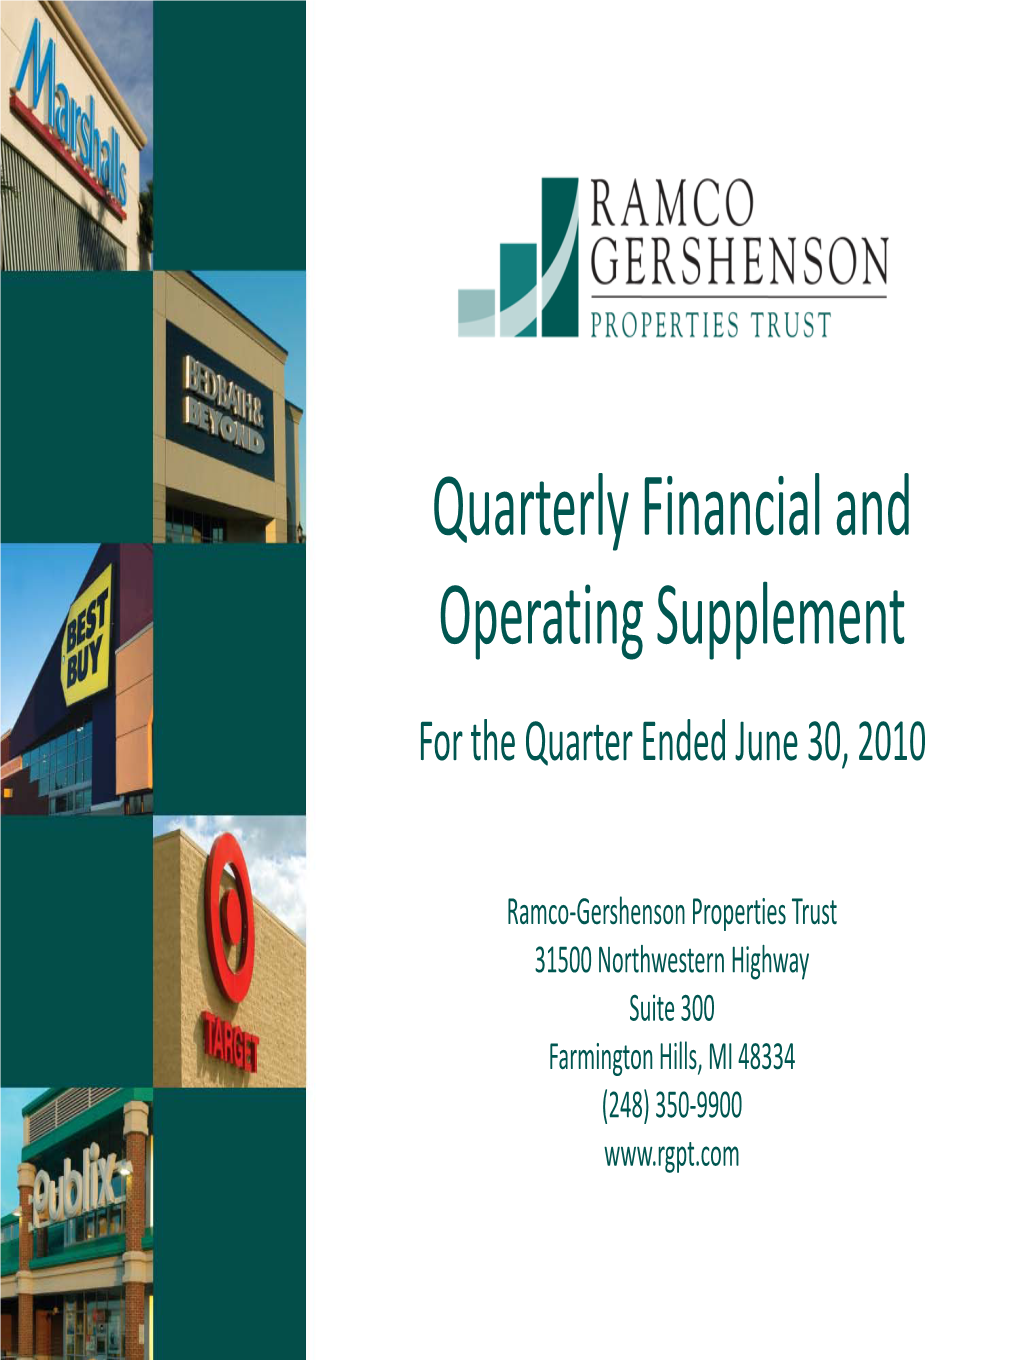 Quarterly Financial and Operating Supplement for the Quarter Ended June 30, 2010